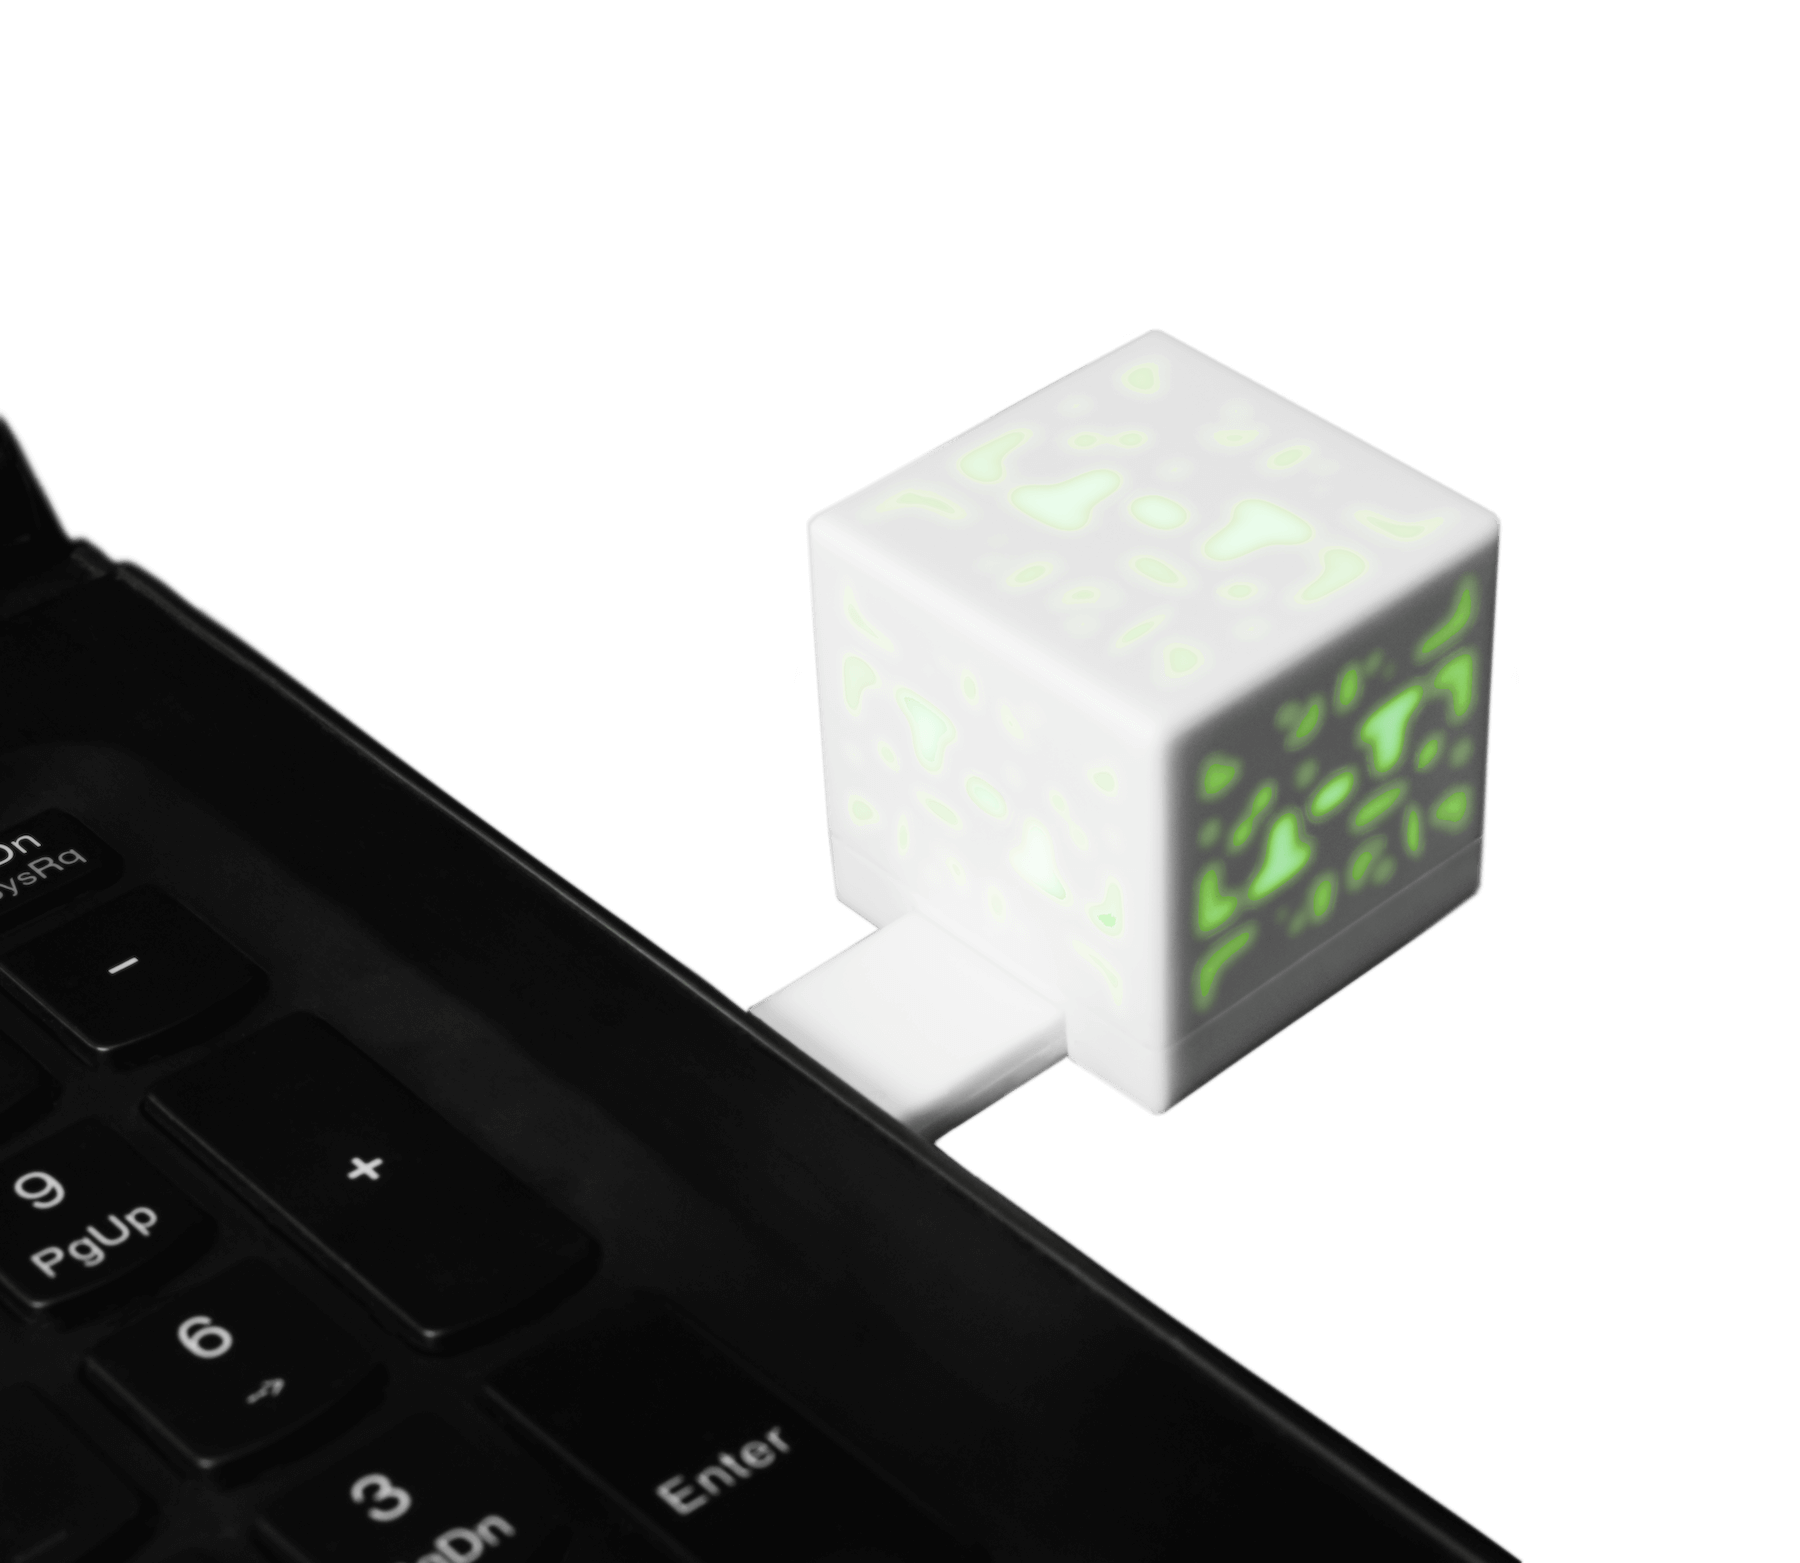 The Shred Cube - A USB Permanent File Shredder for Mac & PC